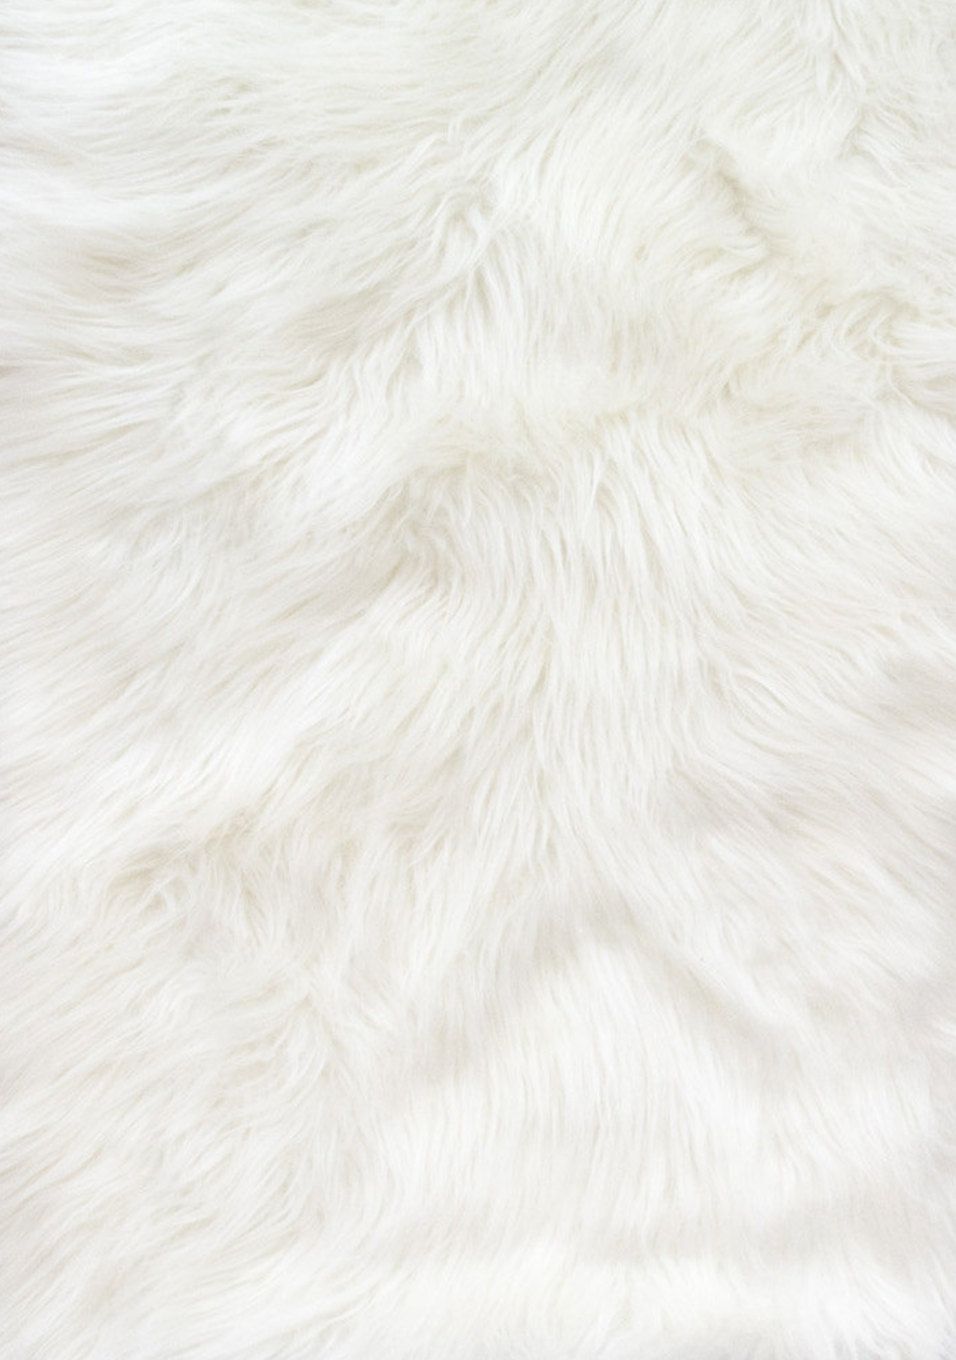 Solid White Shaggy Long Pile Faux Fur Fabric By The Yard image 0. Faux fur fabric, Wallpaper fur, Fur background